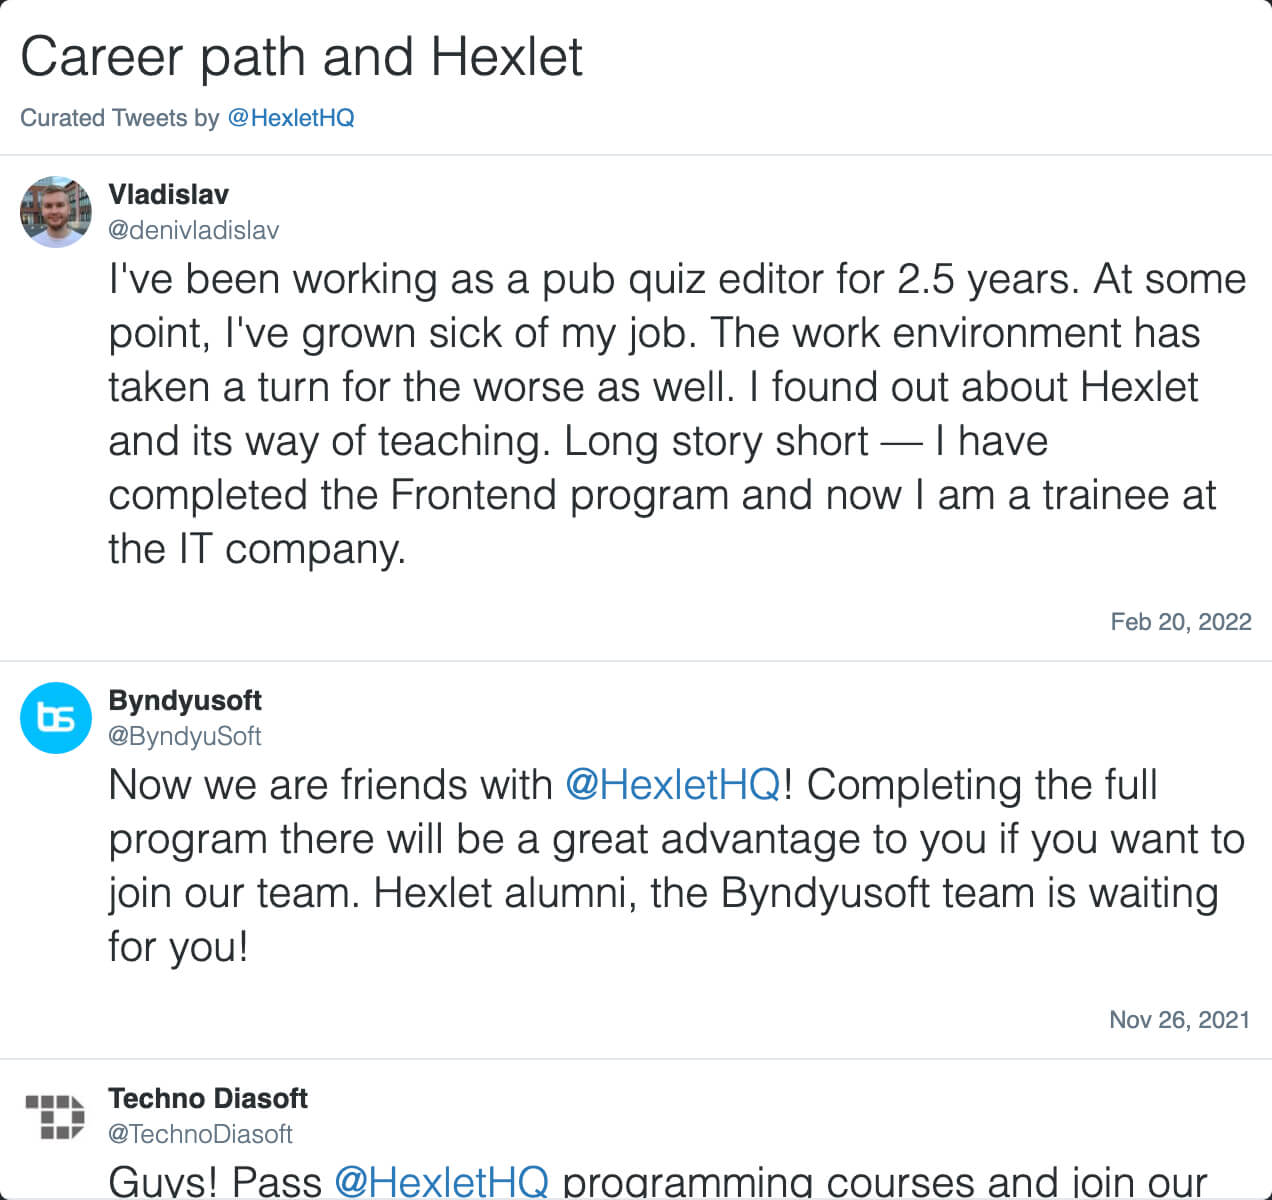 Employment and Hexlet on Twitter